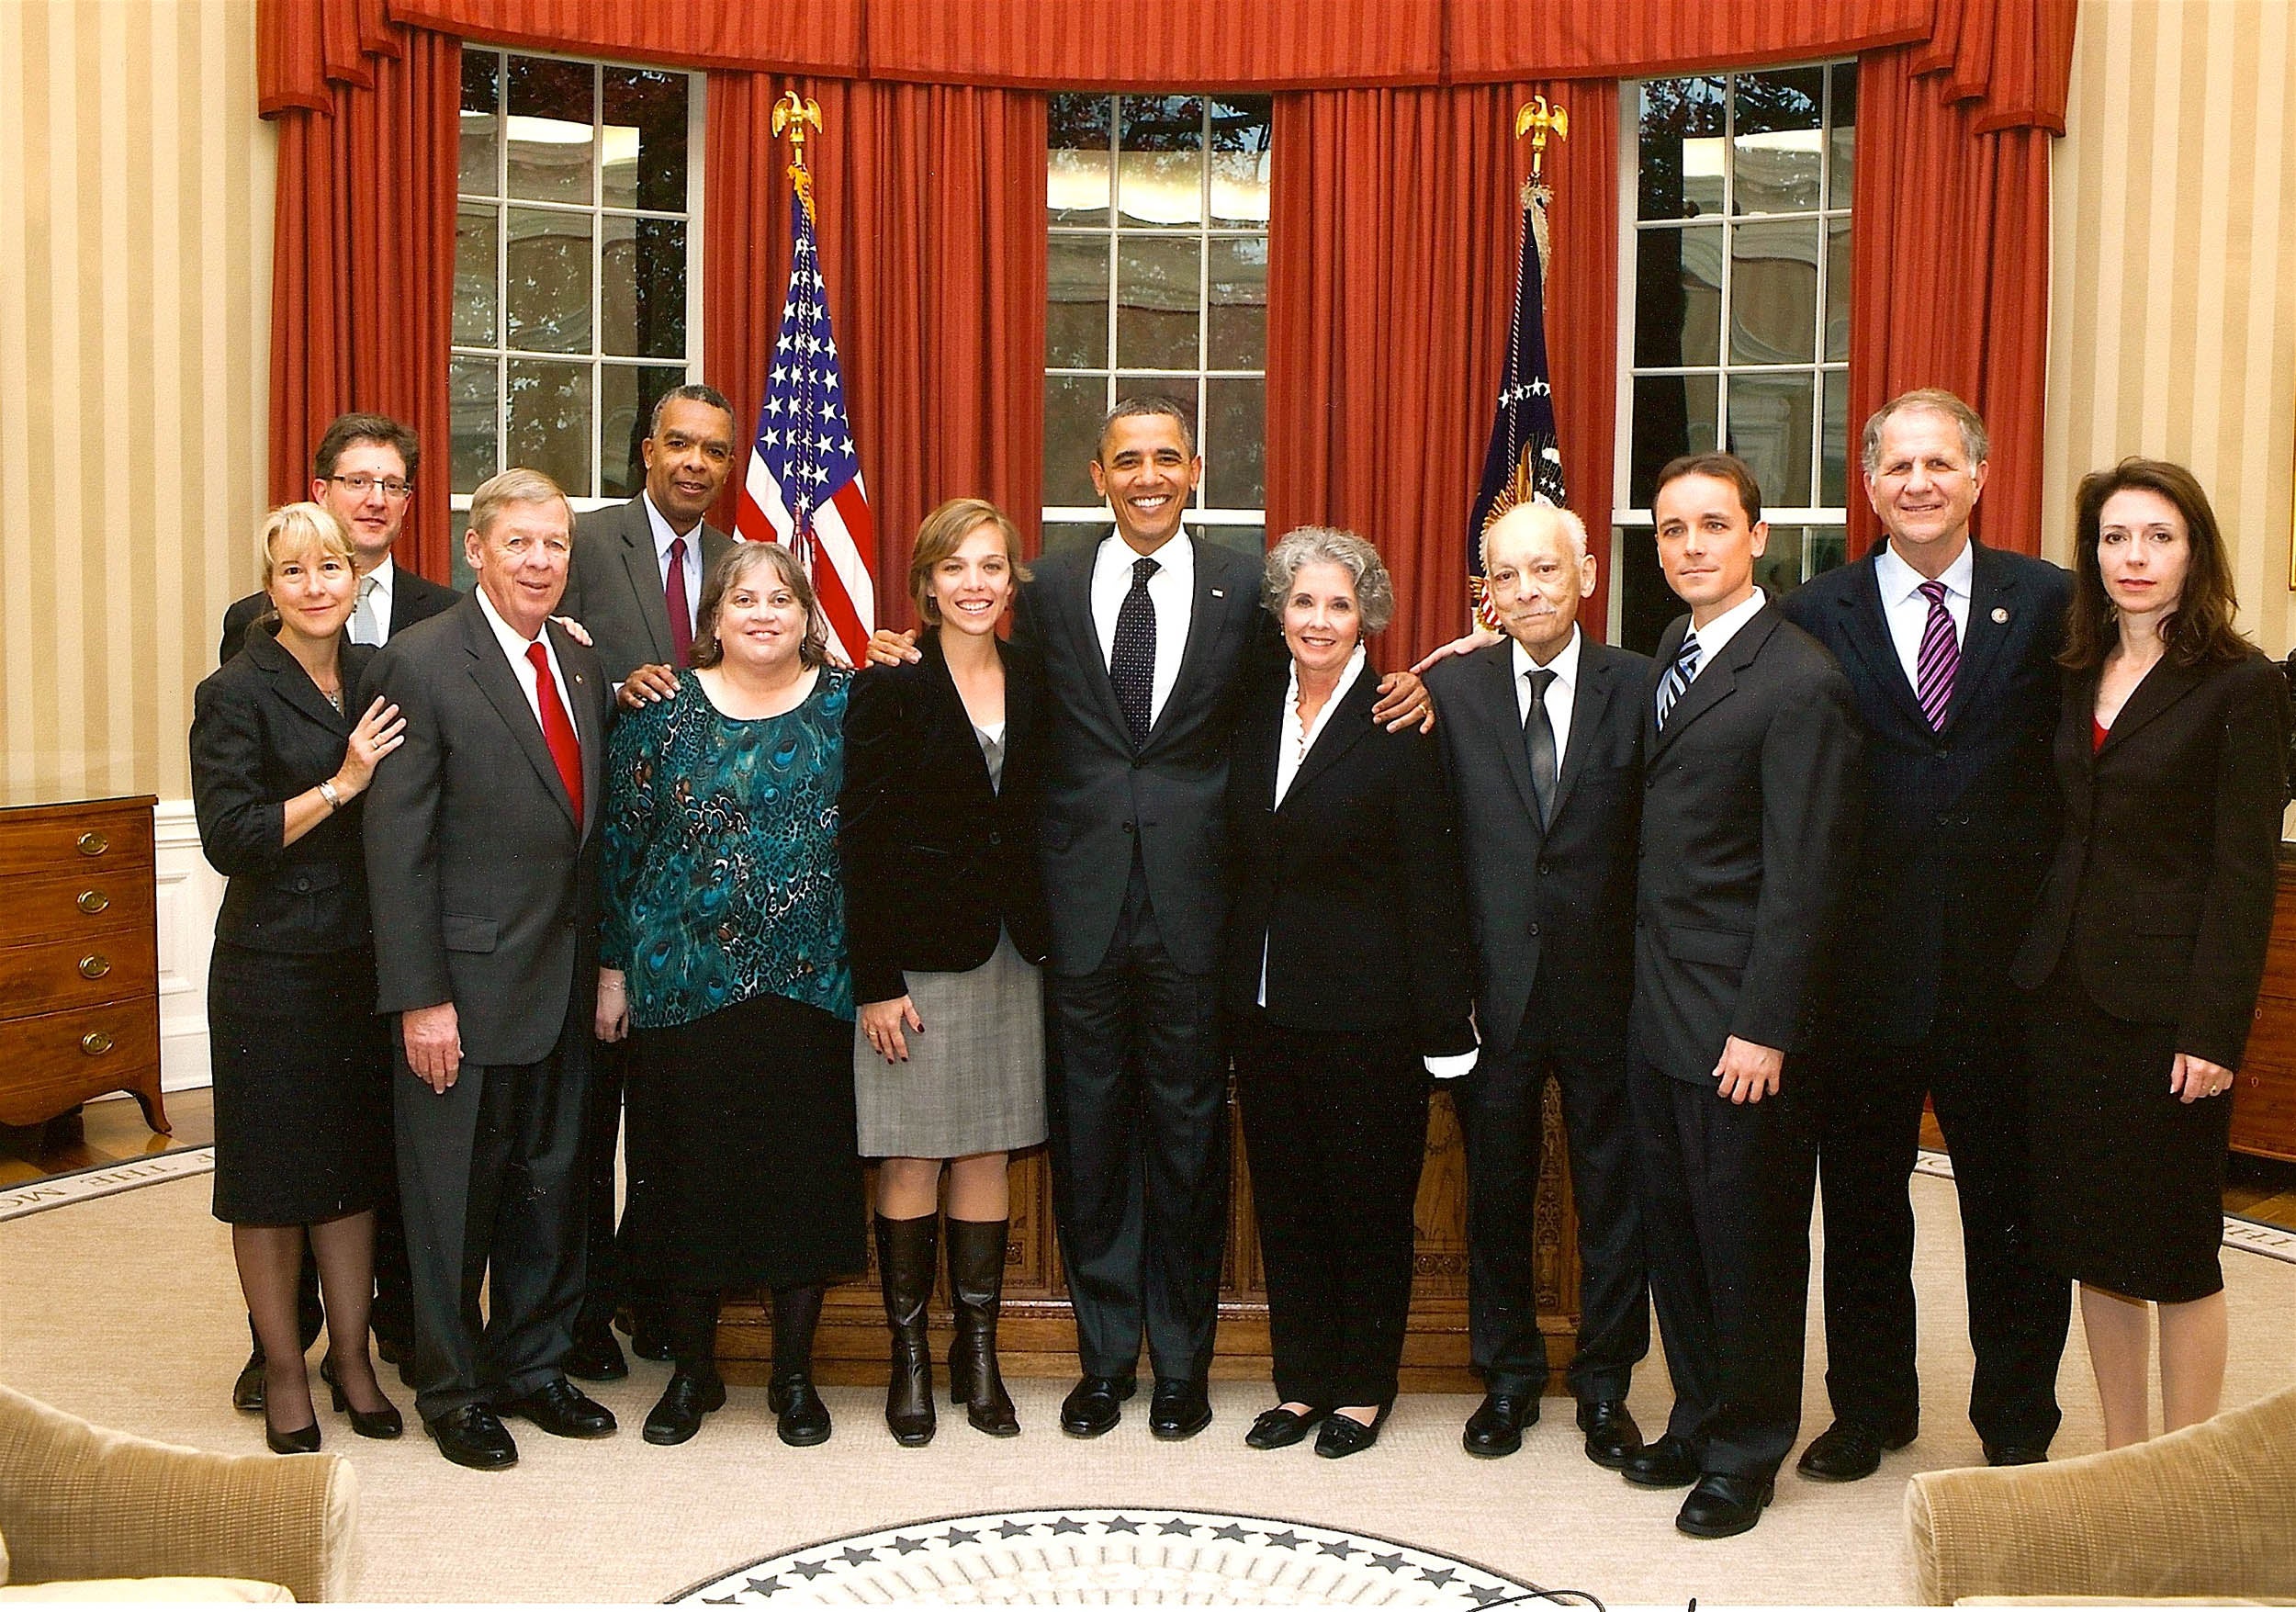 Karestan Koenen in the White House with President Obama and others after passage of Kate Puzey Peace Corps Volunteer Protection Act.